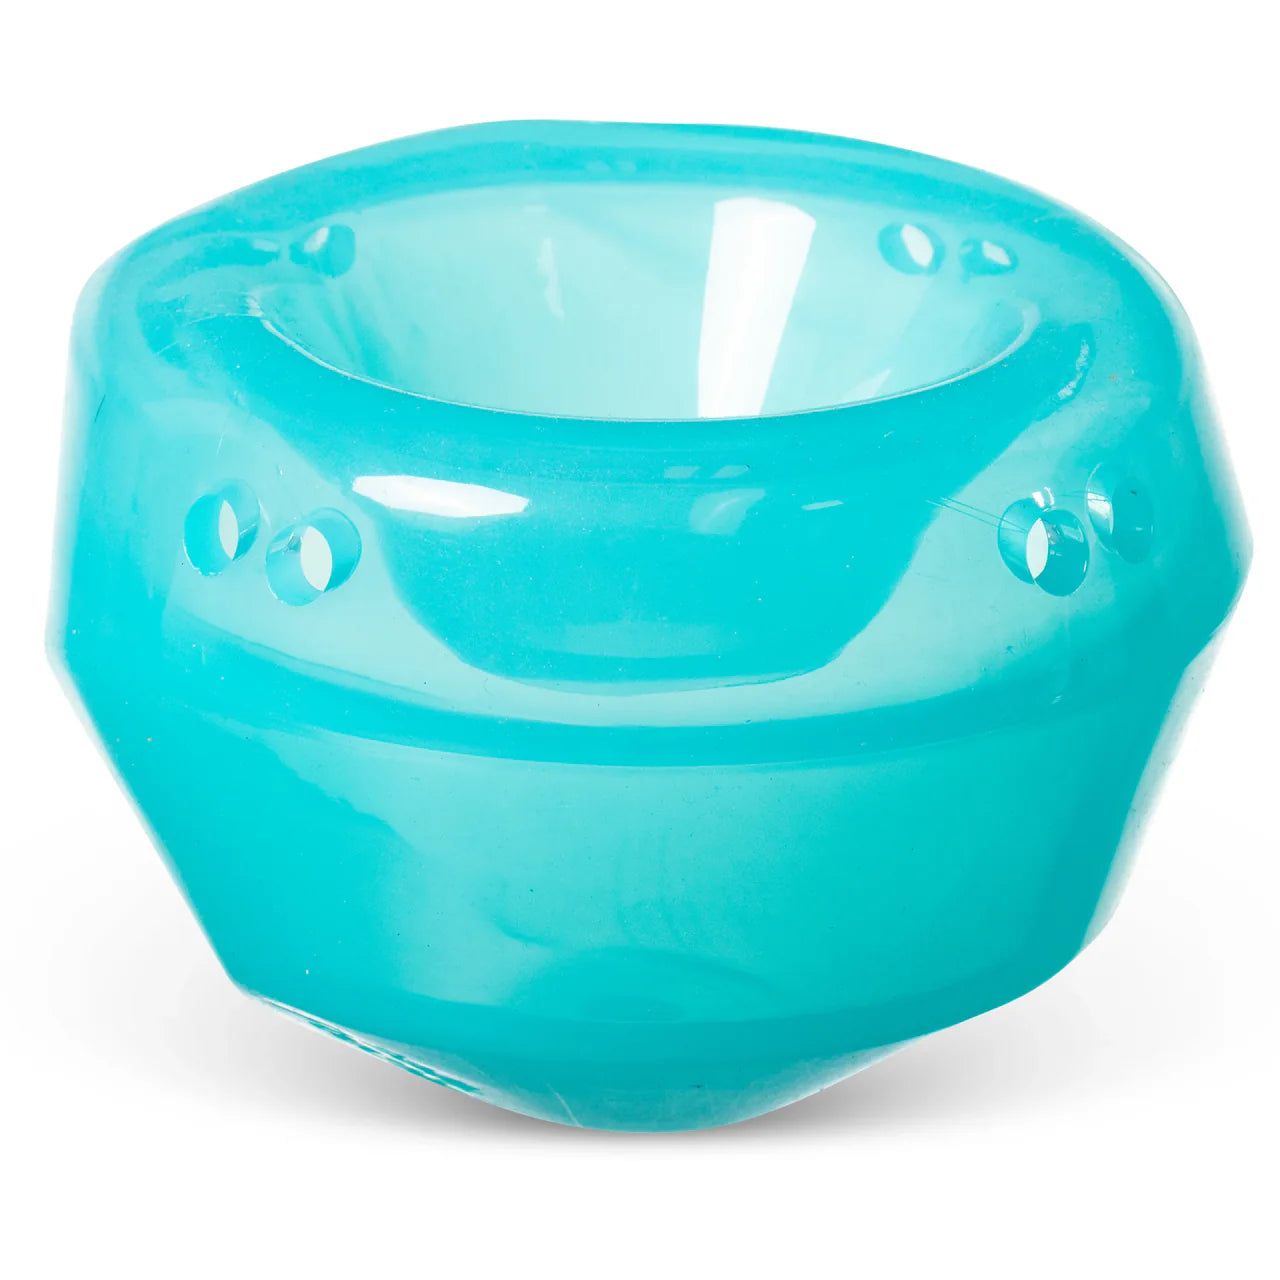 Totally Pooched - Stuff'n Wobble Ball, 5", Teal (For Dogs)